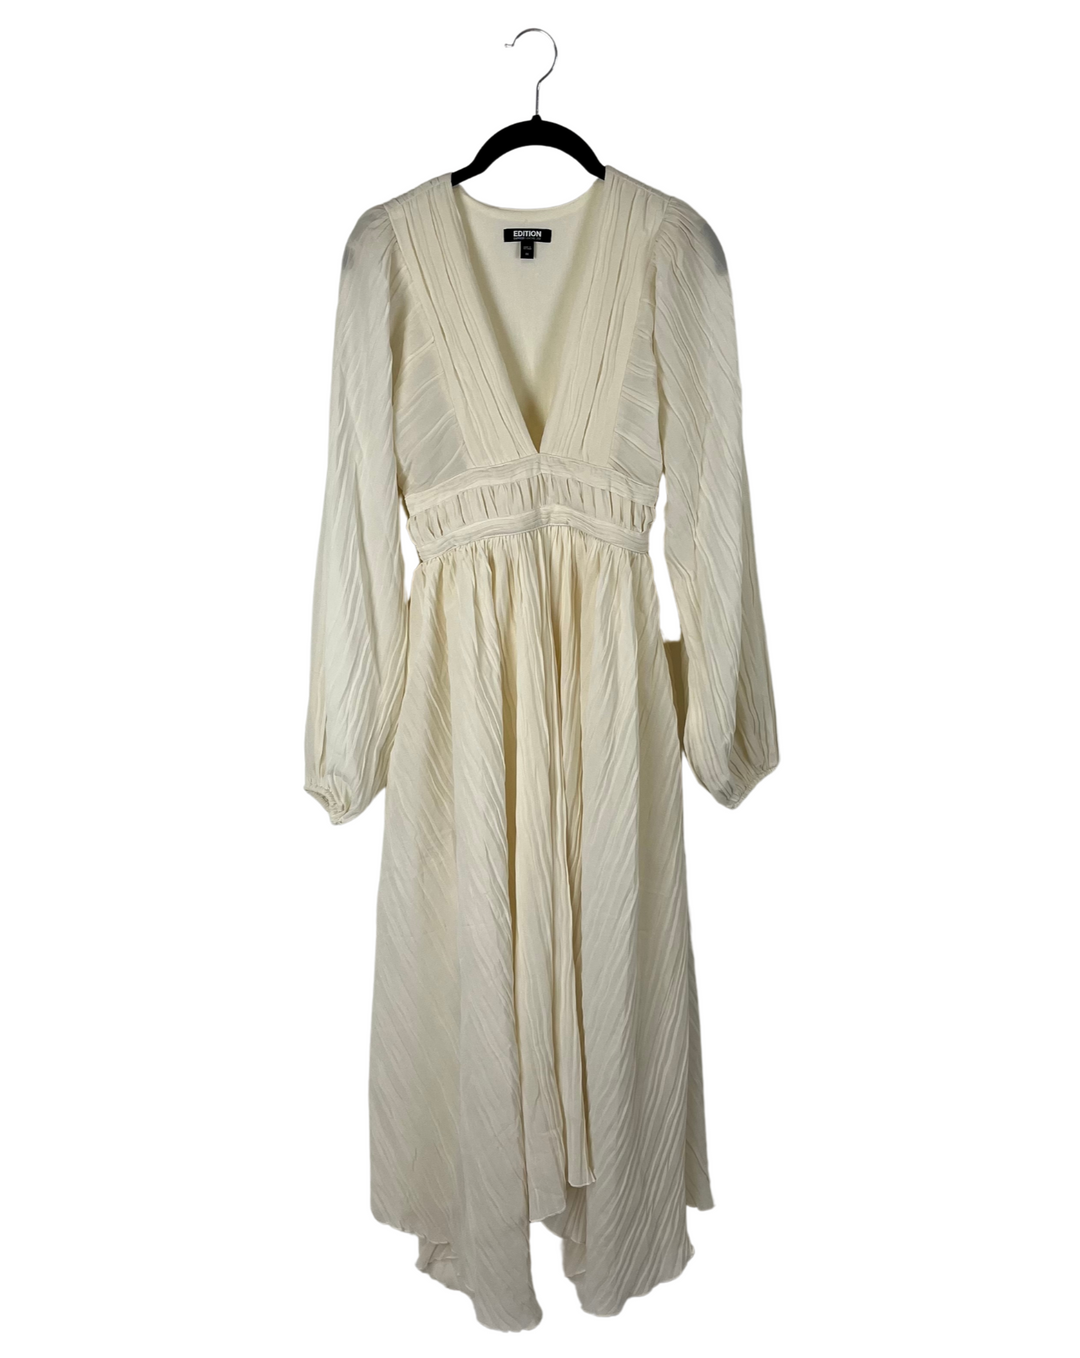 Cream Long Sleeve Dress - Size 00, 0 and 8